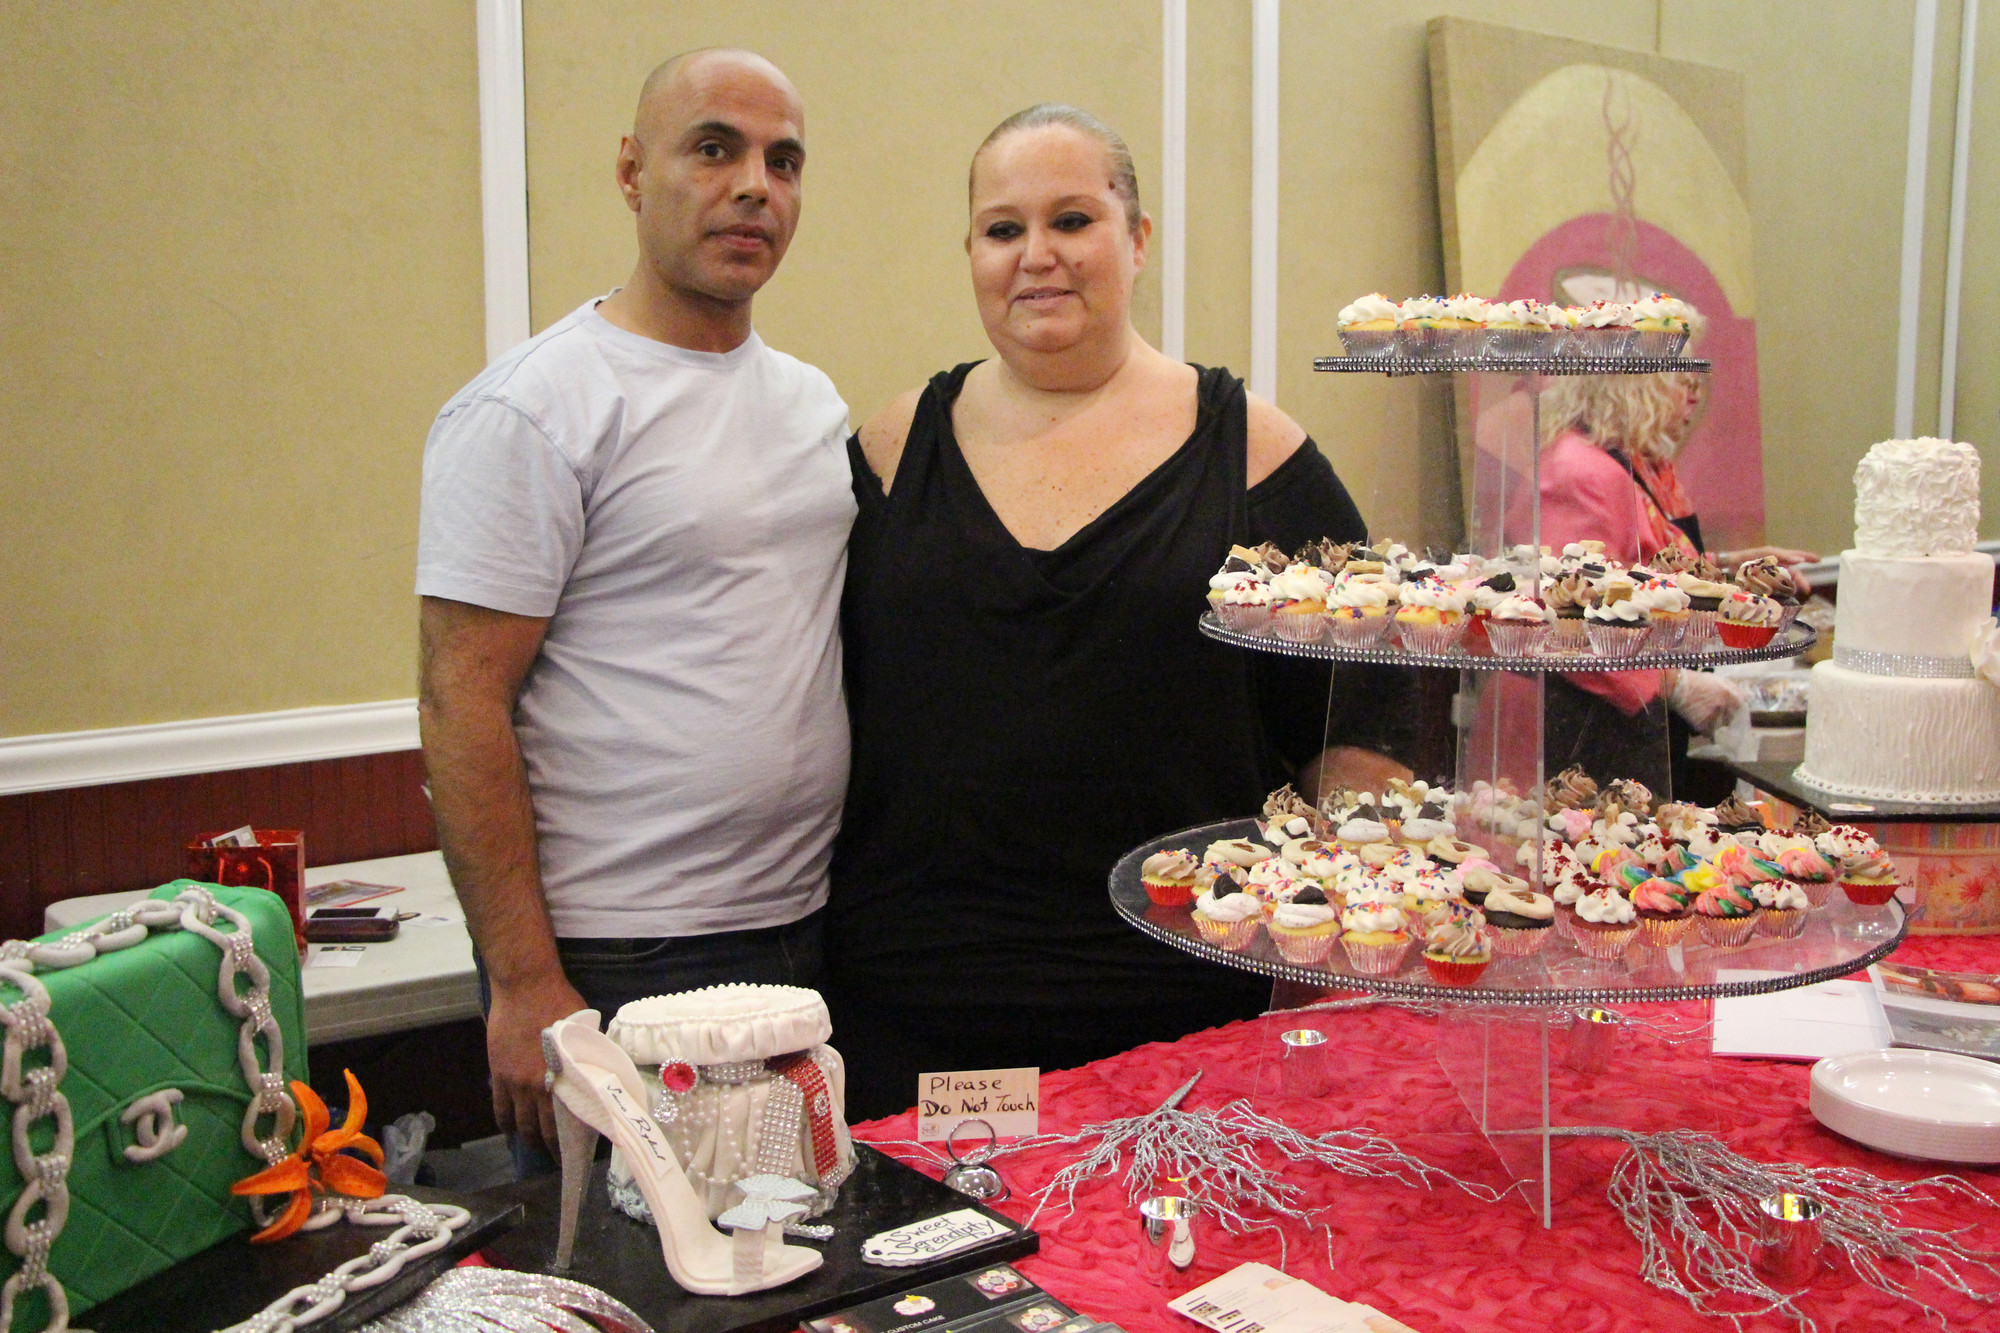 Jacob and Marina Donal of Sweet Serendipity presented delicious cupcakes, cakes and a dessert table for every occasion.